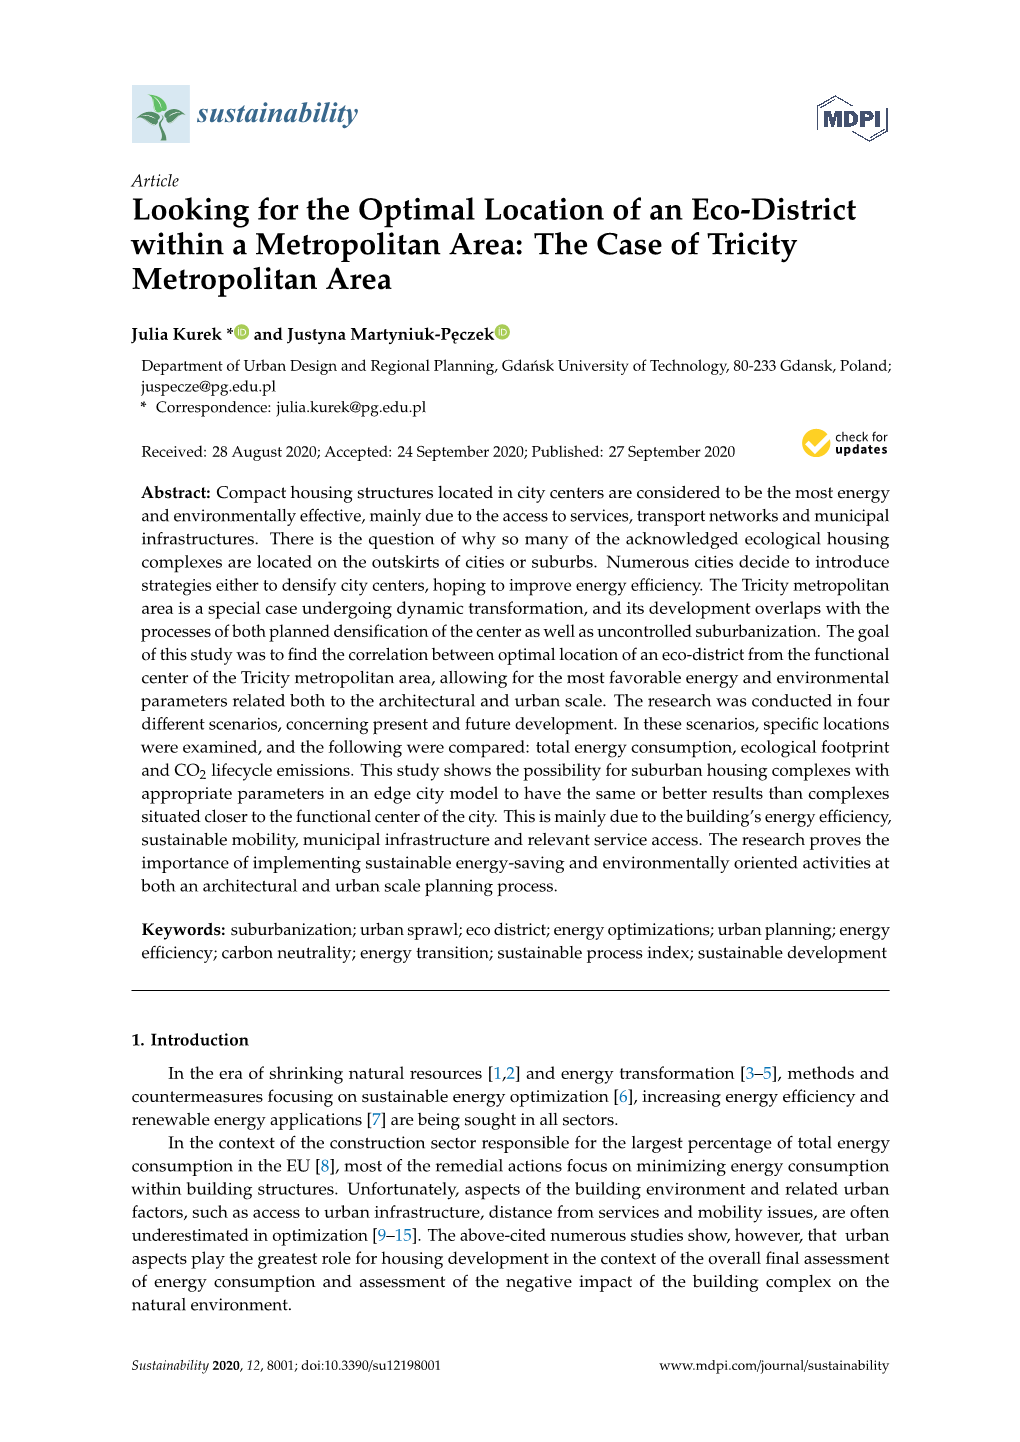 Looking for the Optimal Location of an Eco-District Within a Metropolitan Area: the Case of Tricity Metropolitan Area